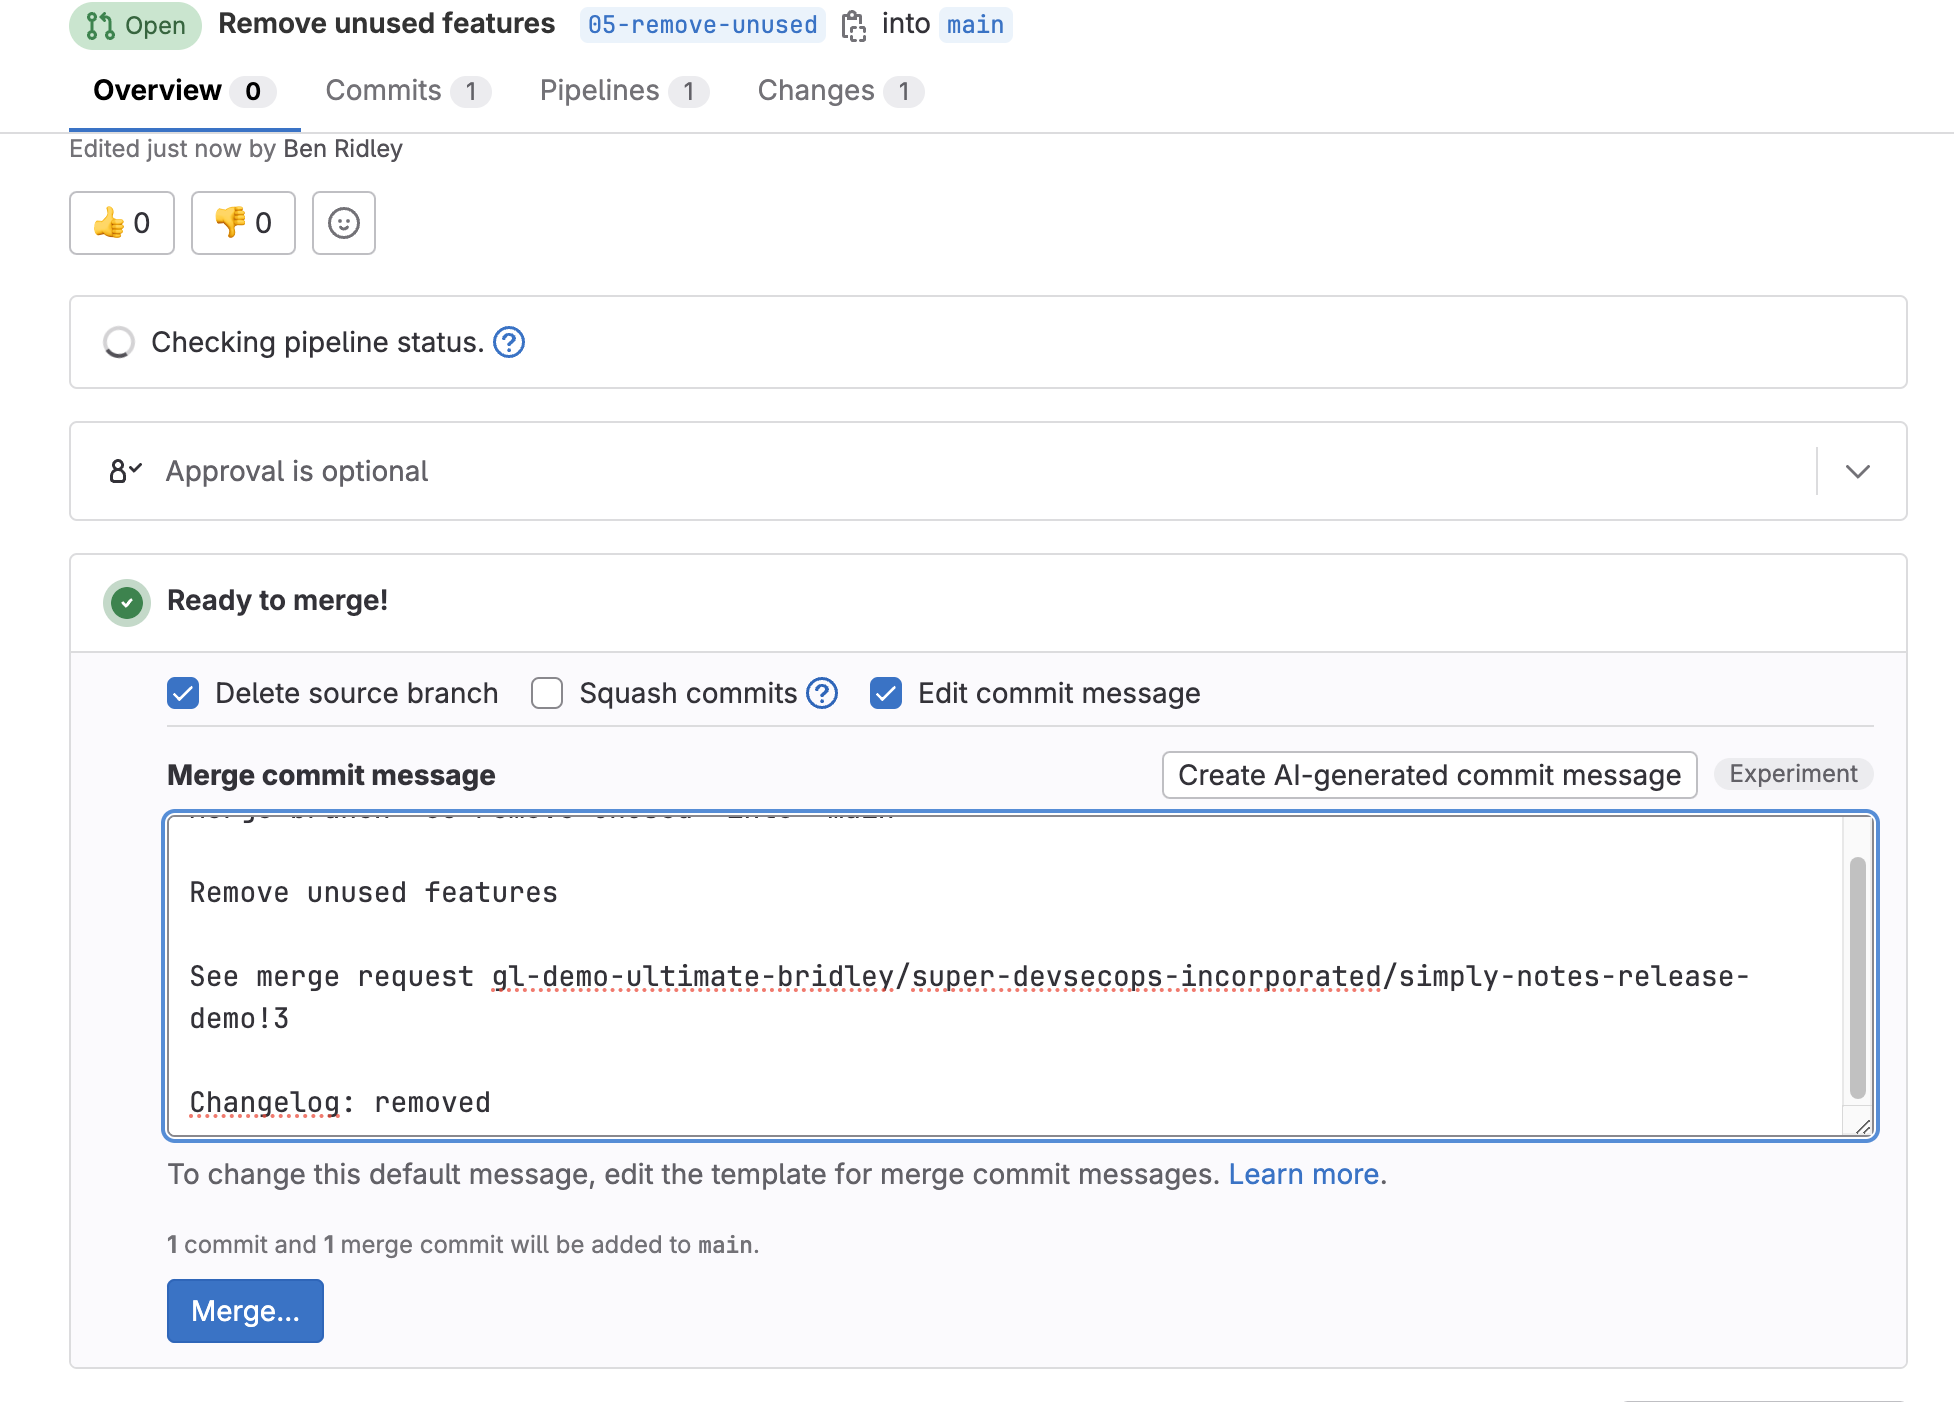 A screenshot the GitLab UI showing a merge request removing unused features